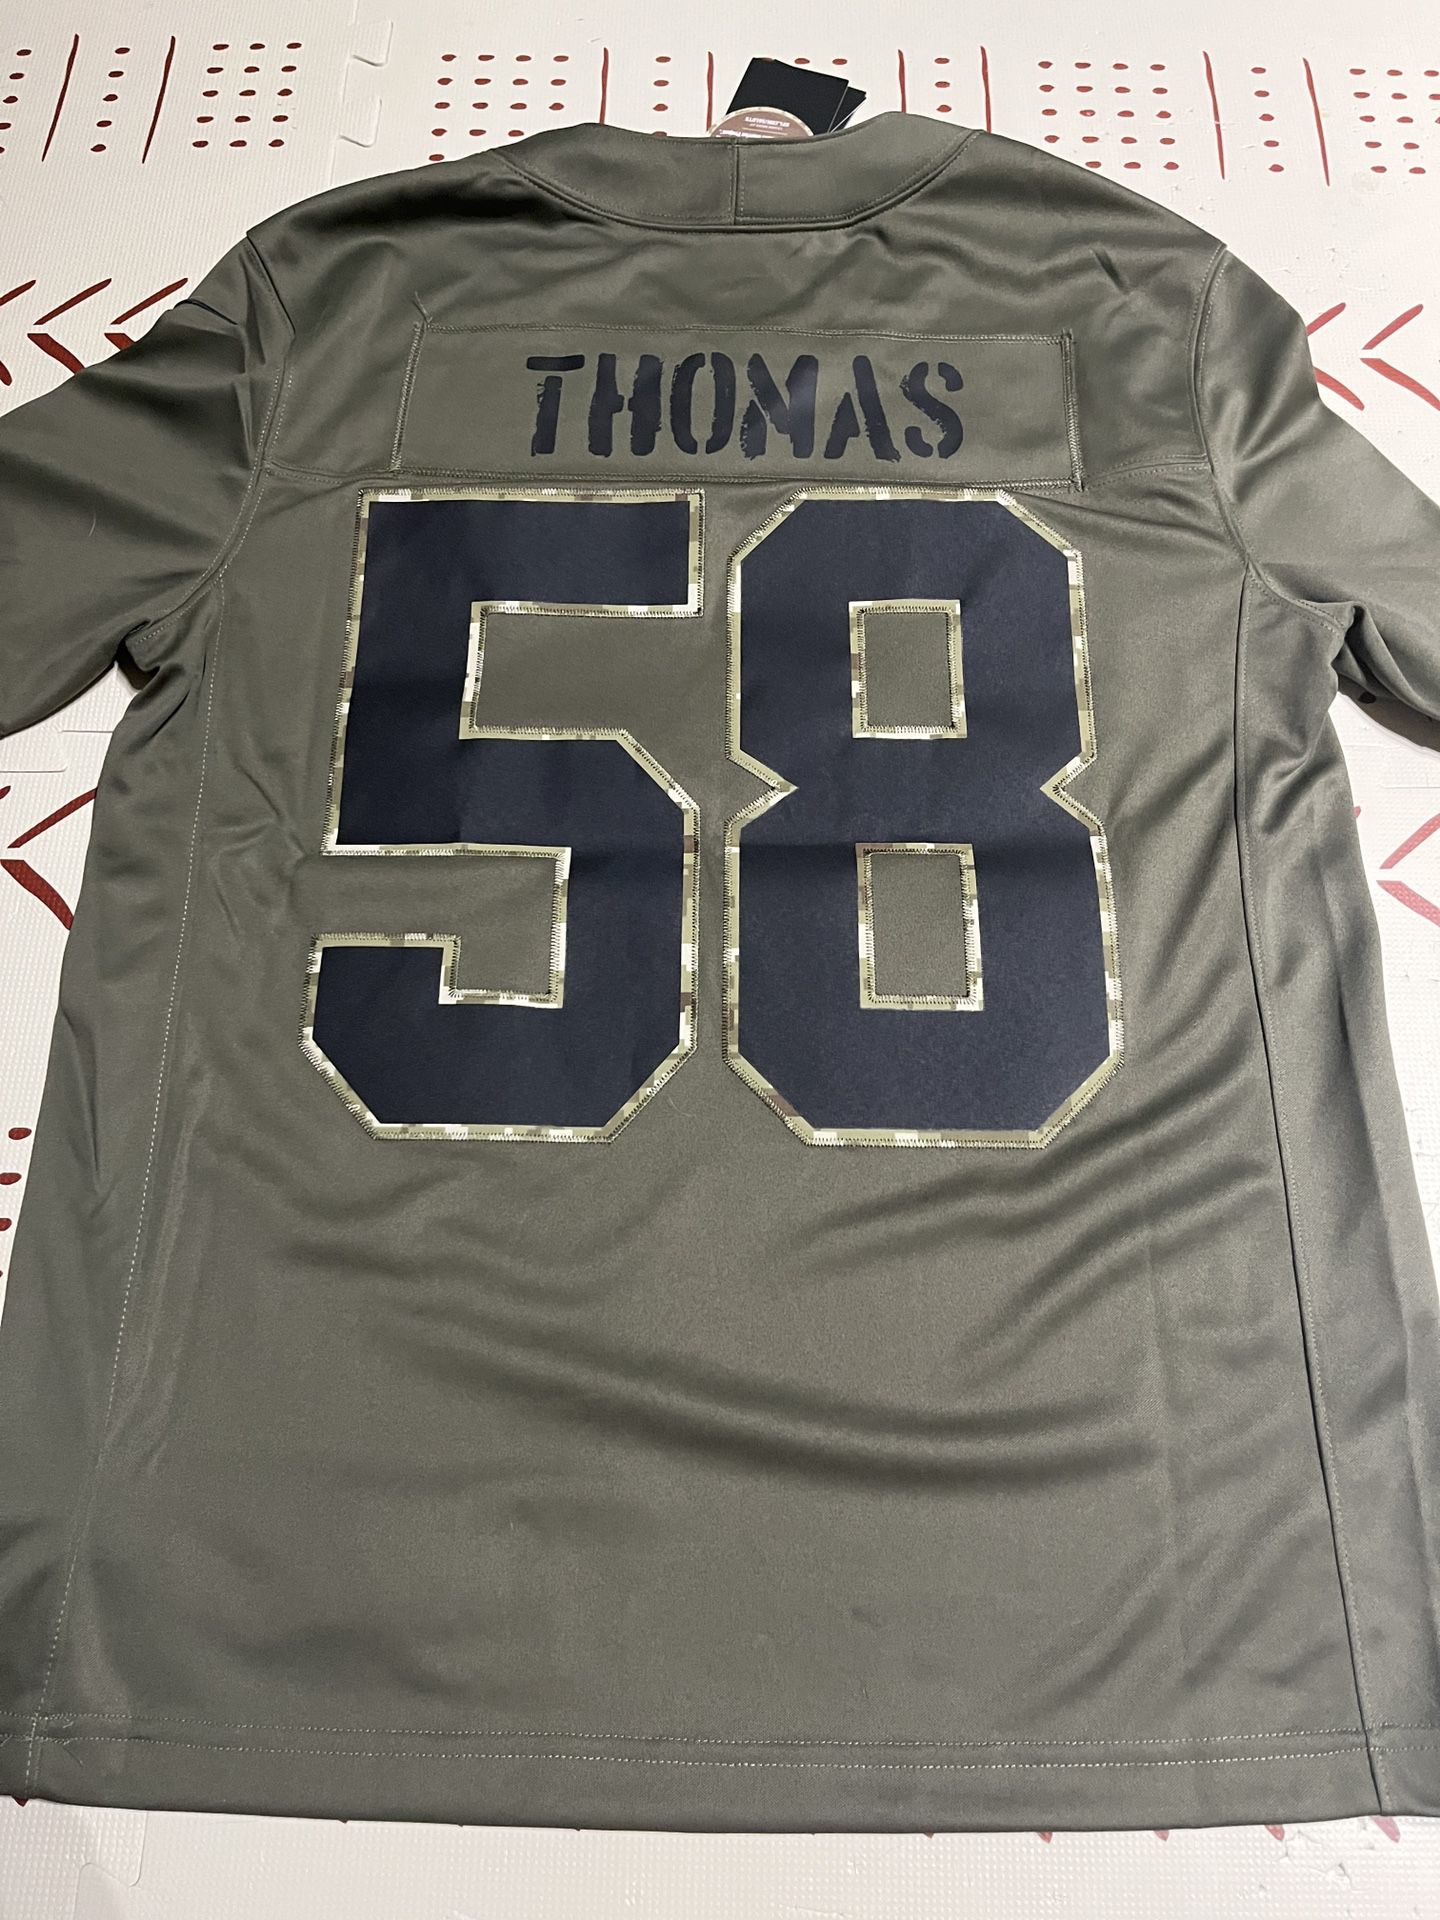 Derrick Thomas Authentic Stitched Jersey